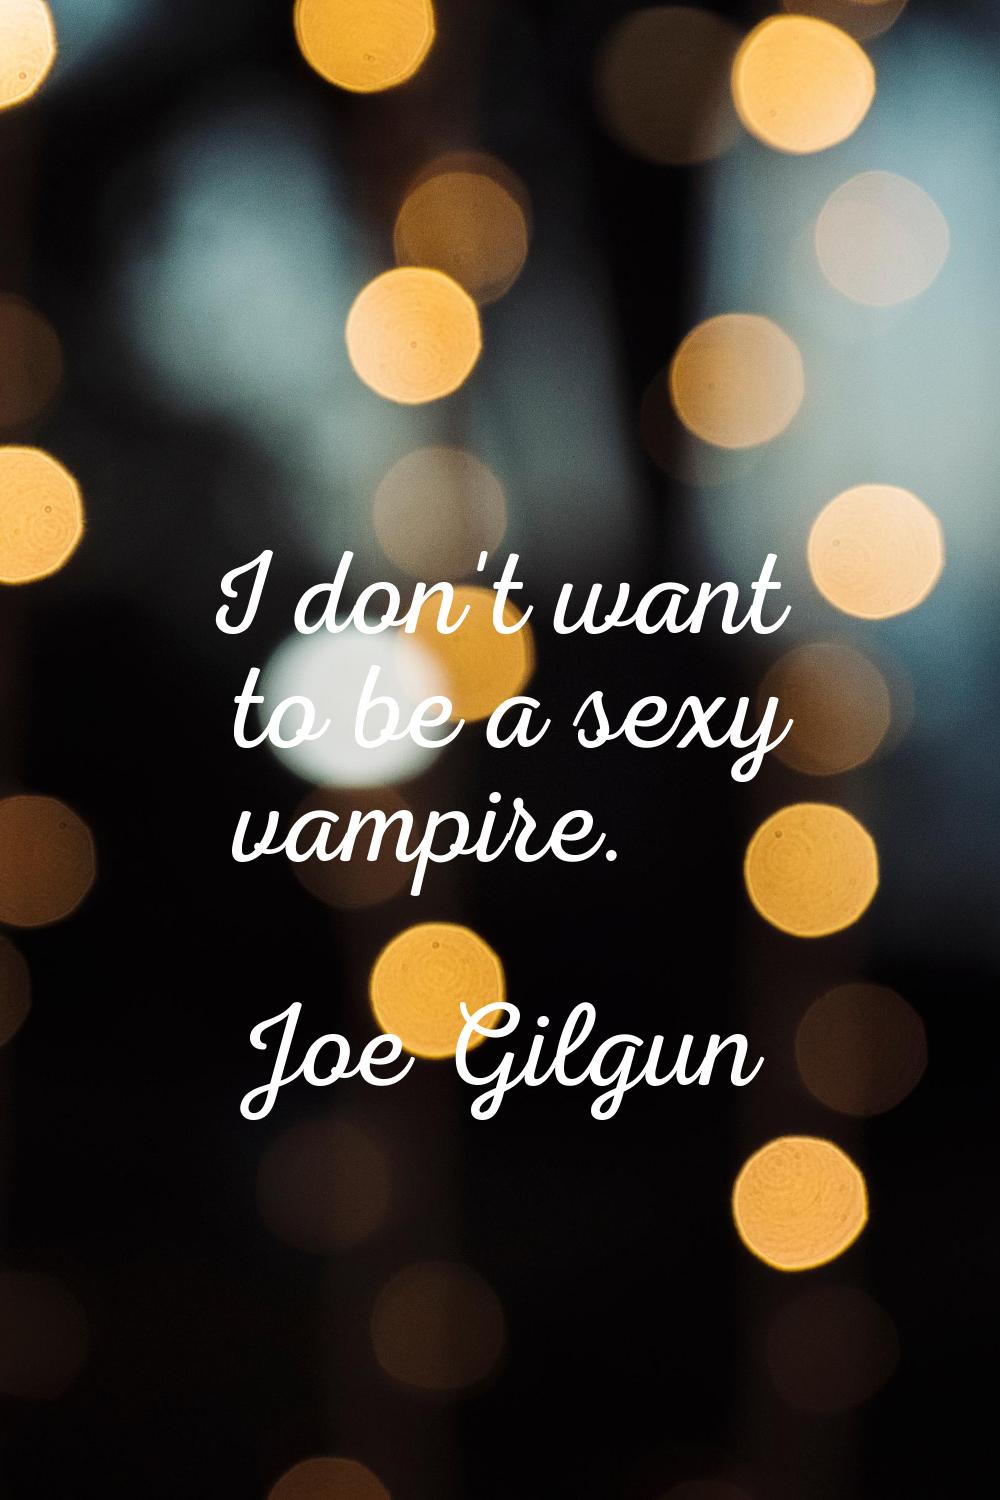 I don't want to be a sexy vampire.